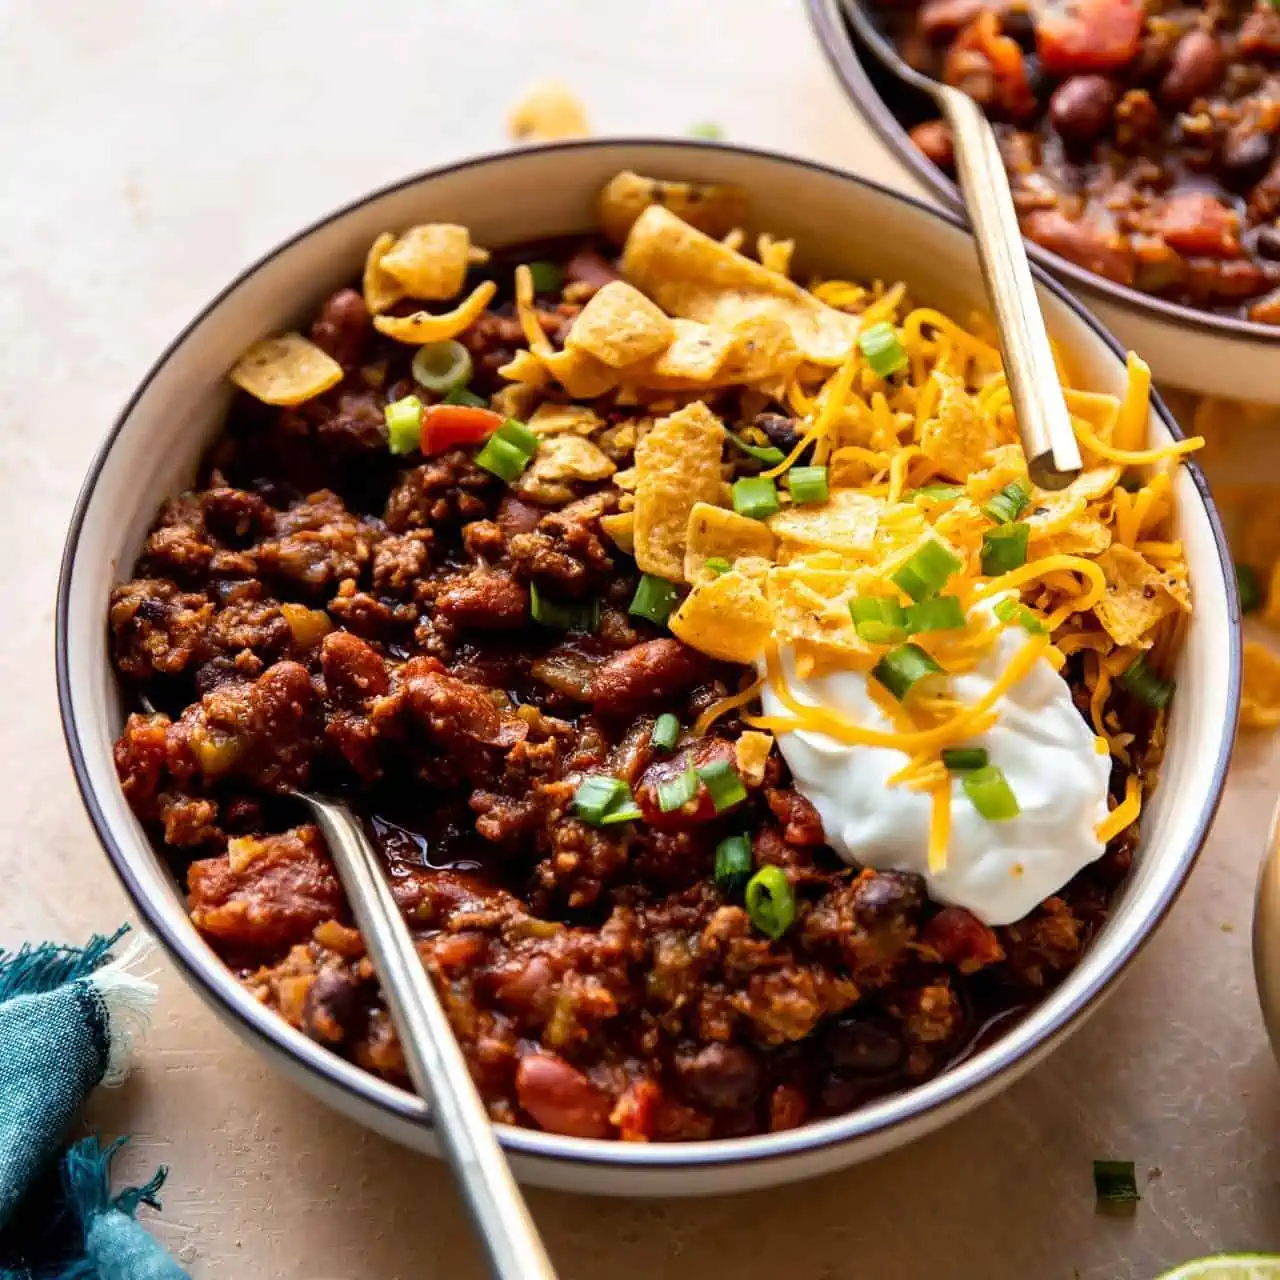 Bowl filled with homemade classic chili topped with sour cream, cheese, chips and diced green onion.